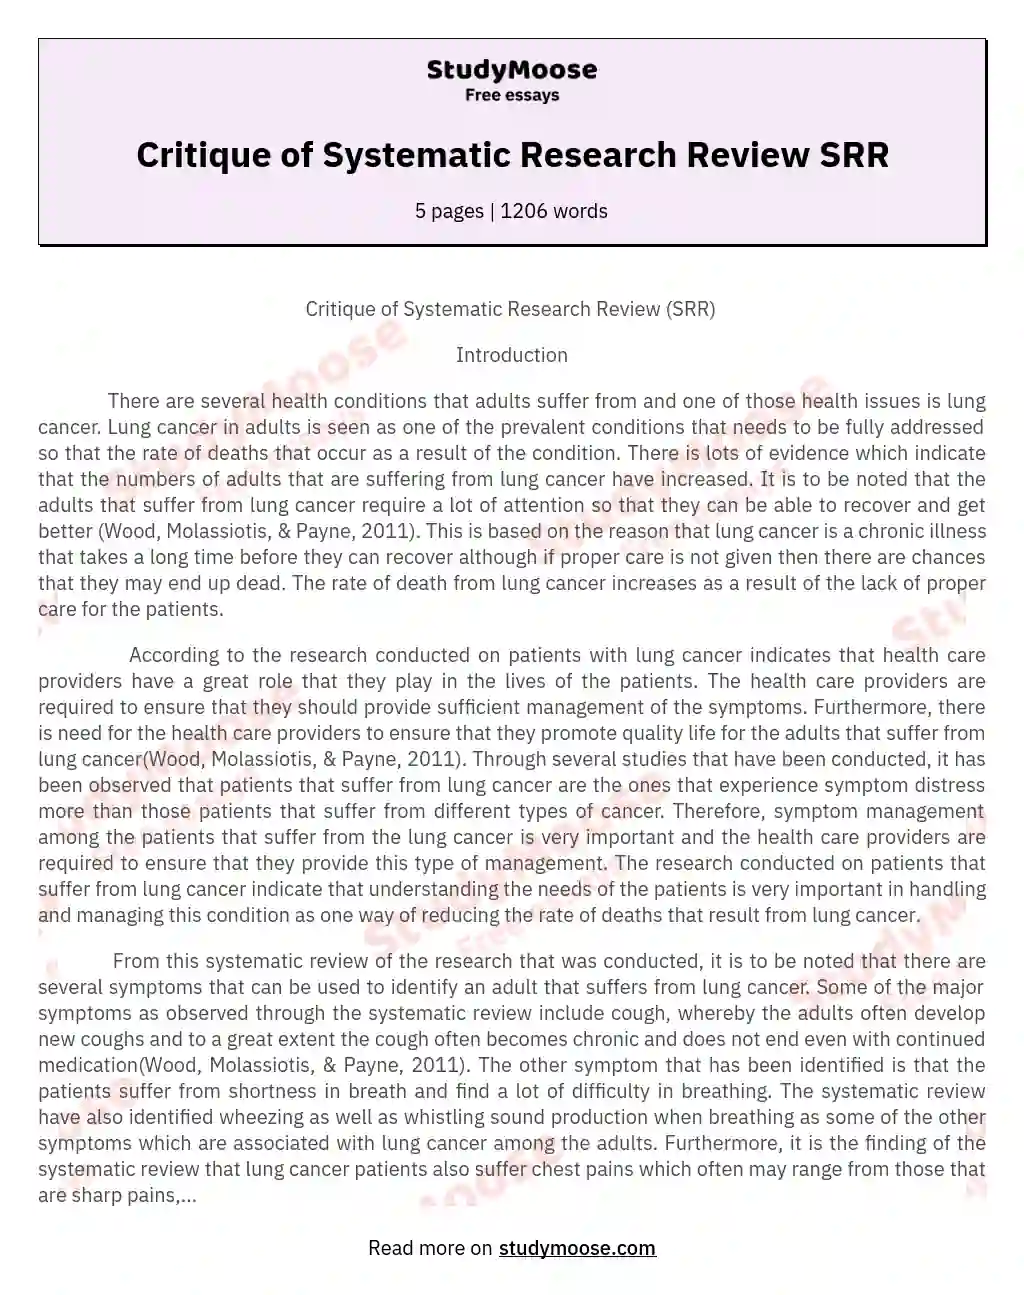 Critique of Systematic Research Review SRR essay